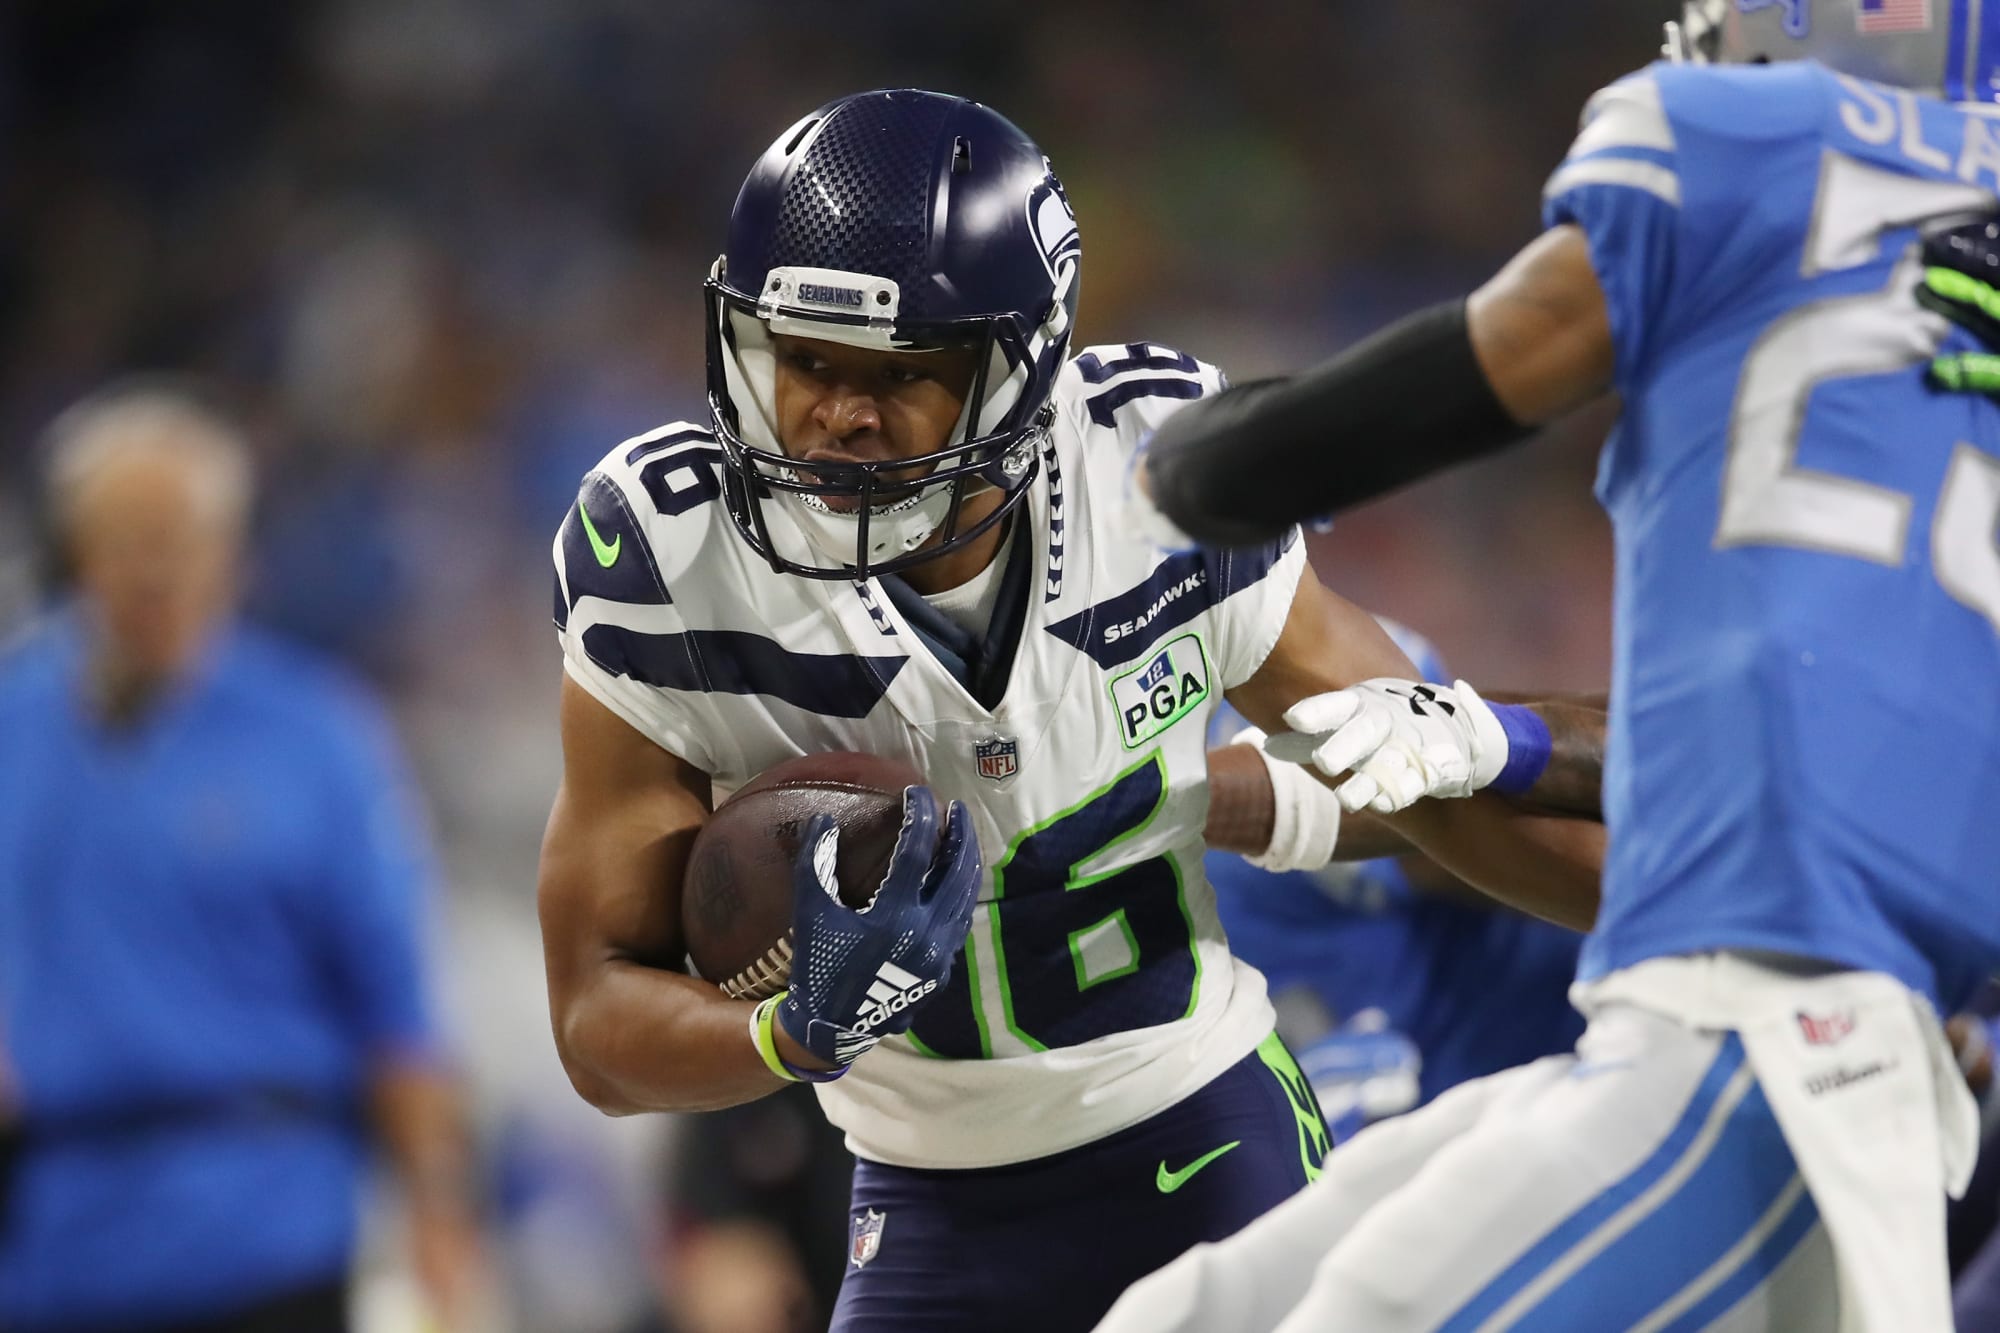 Seahawks Game Today Seahawks vs Lions injury report, schedule, live